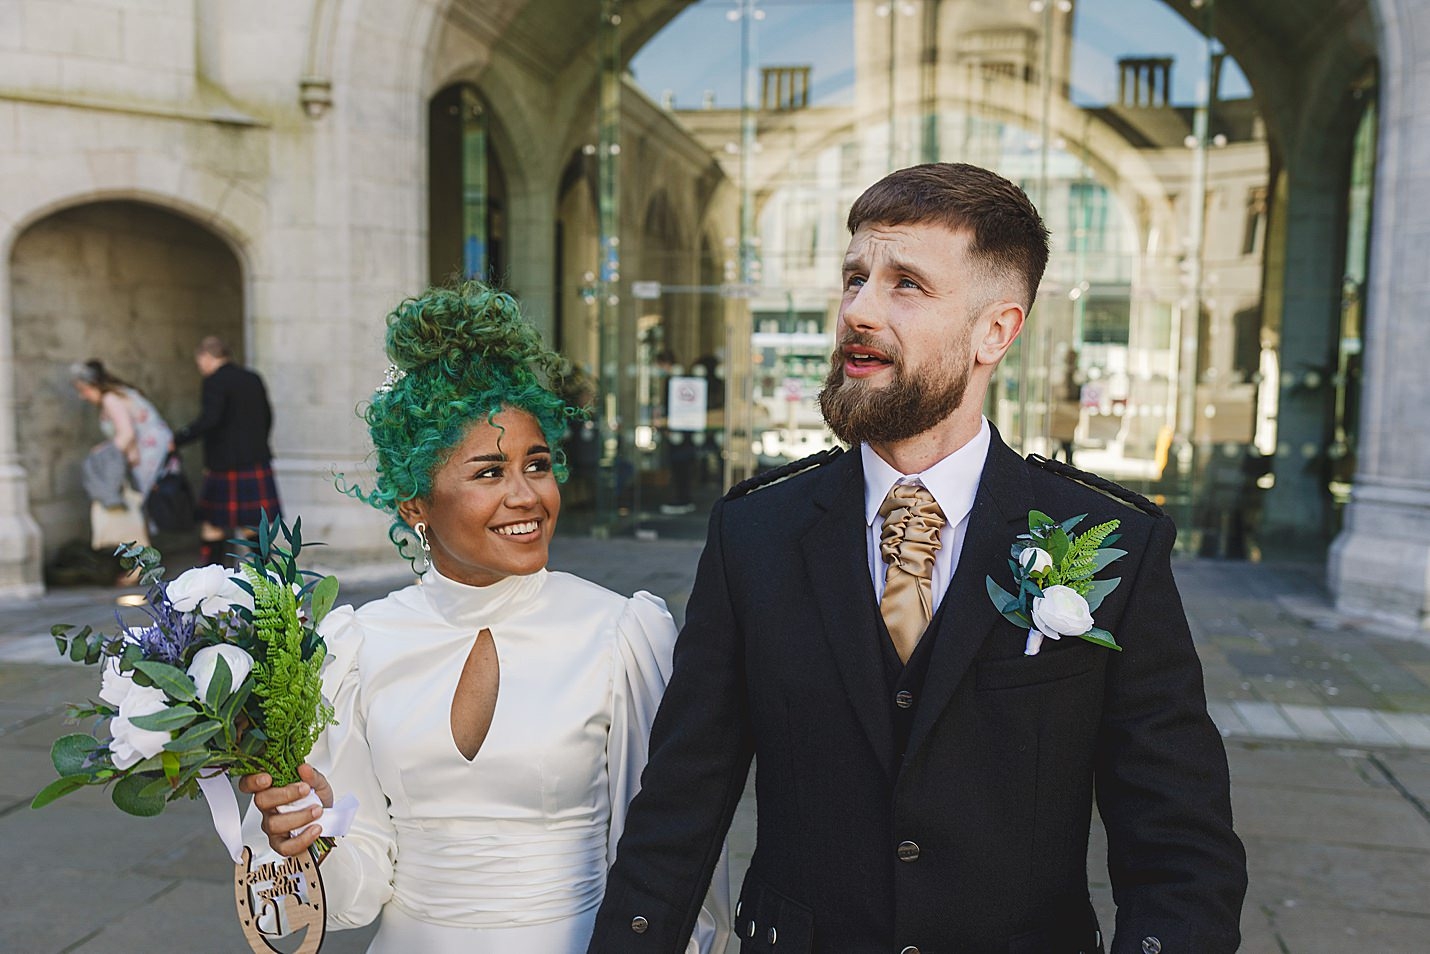 bride wearing white dress with green hair and groom wearing kilt outfit walking hand in hand as they leave the venue marischal college wedding clarke joss photography